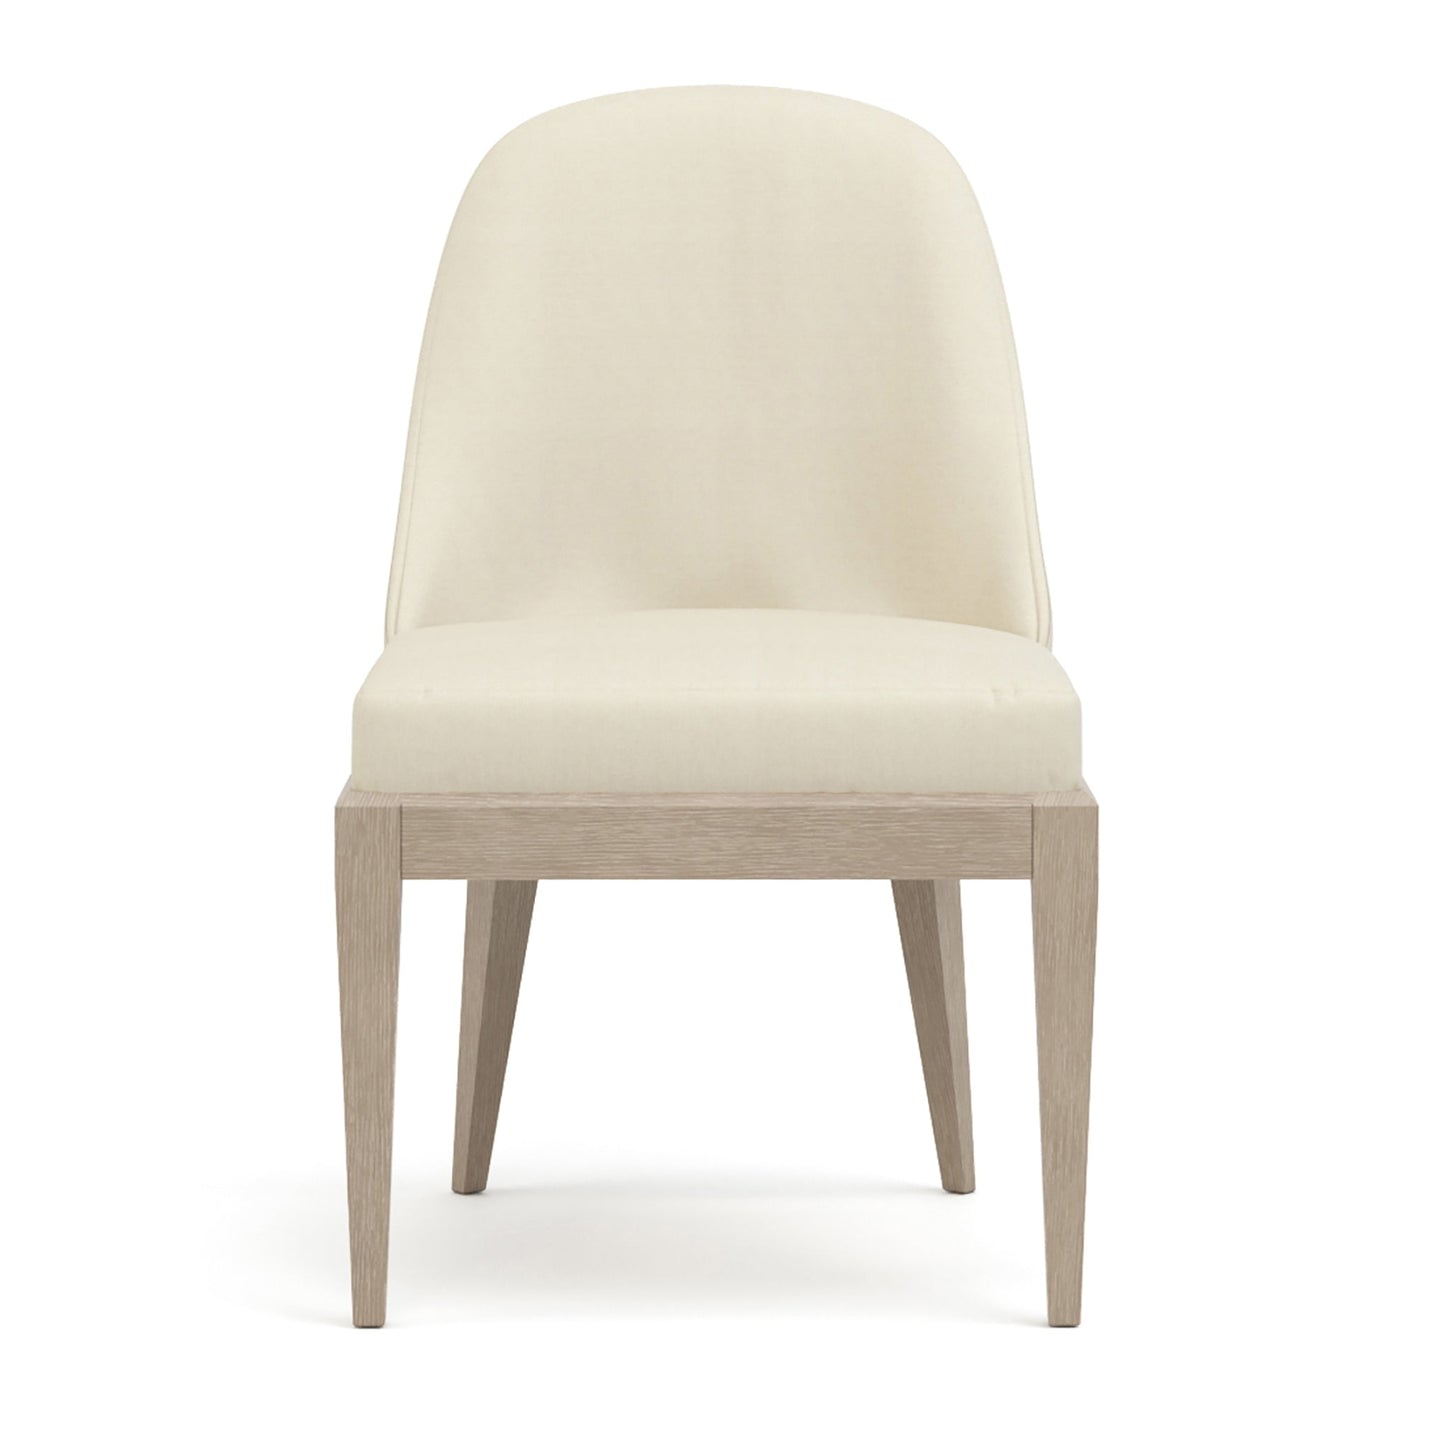 Maidstone Upholstered Side Chair in 201 Sandbank finish